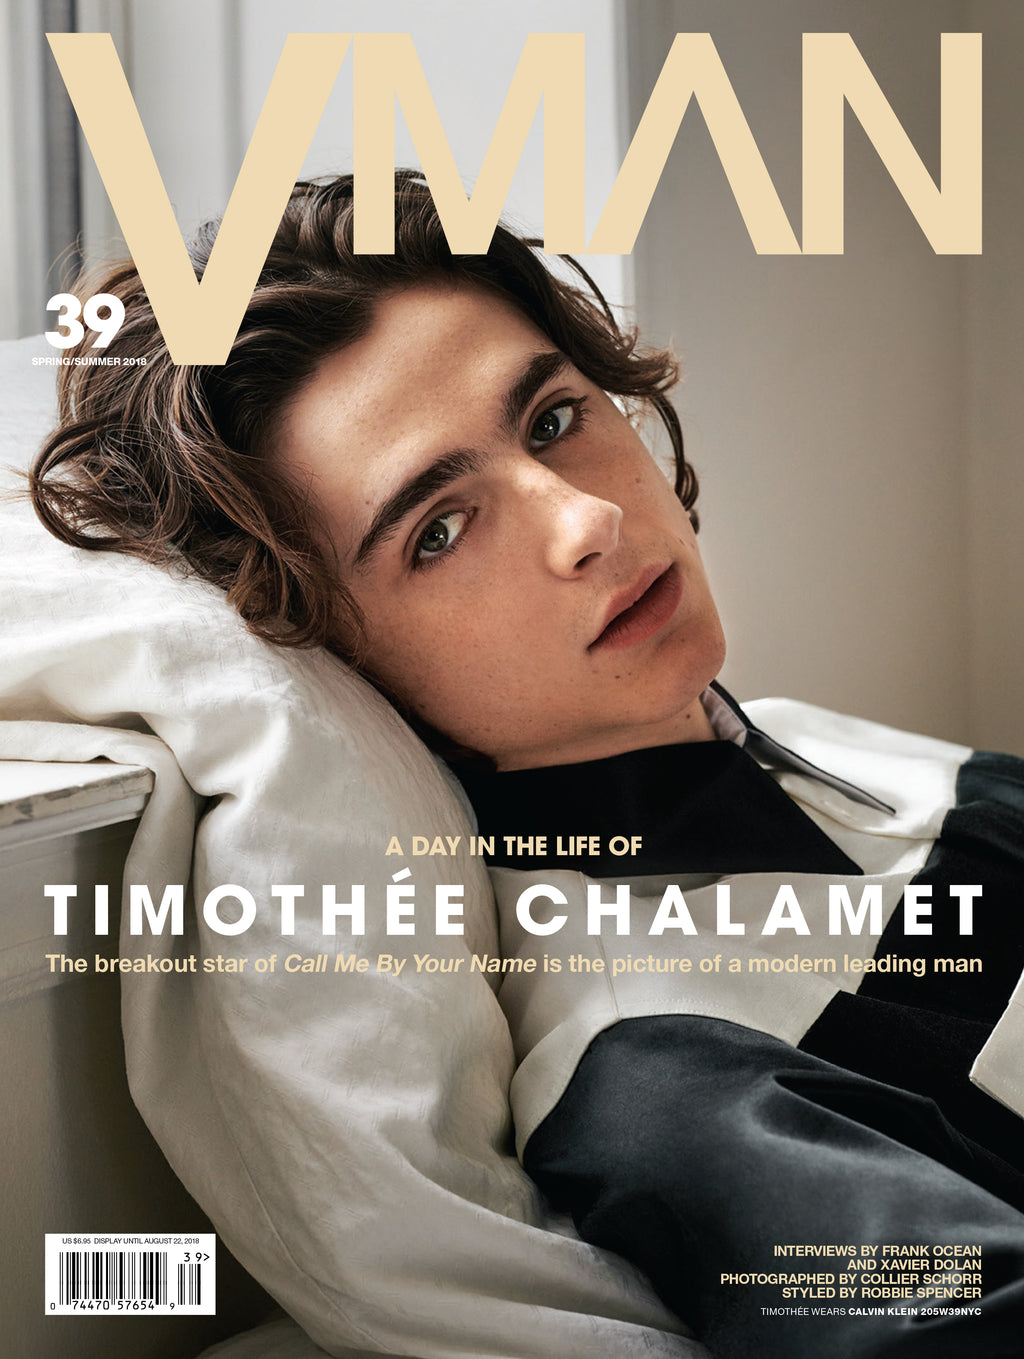 VMAN 39: A DAY IN THE LIFE OF TIMOTHÉE CHALAMET